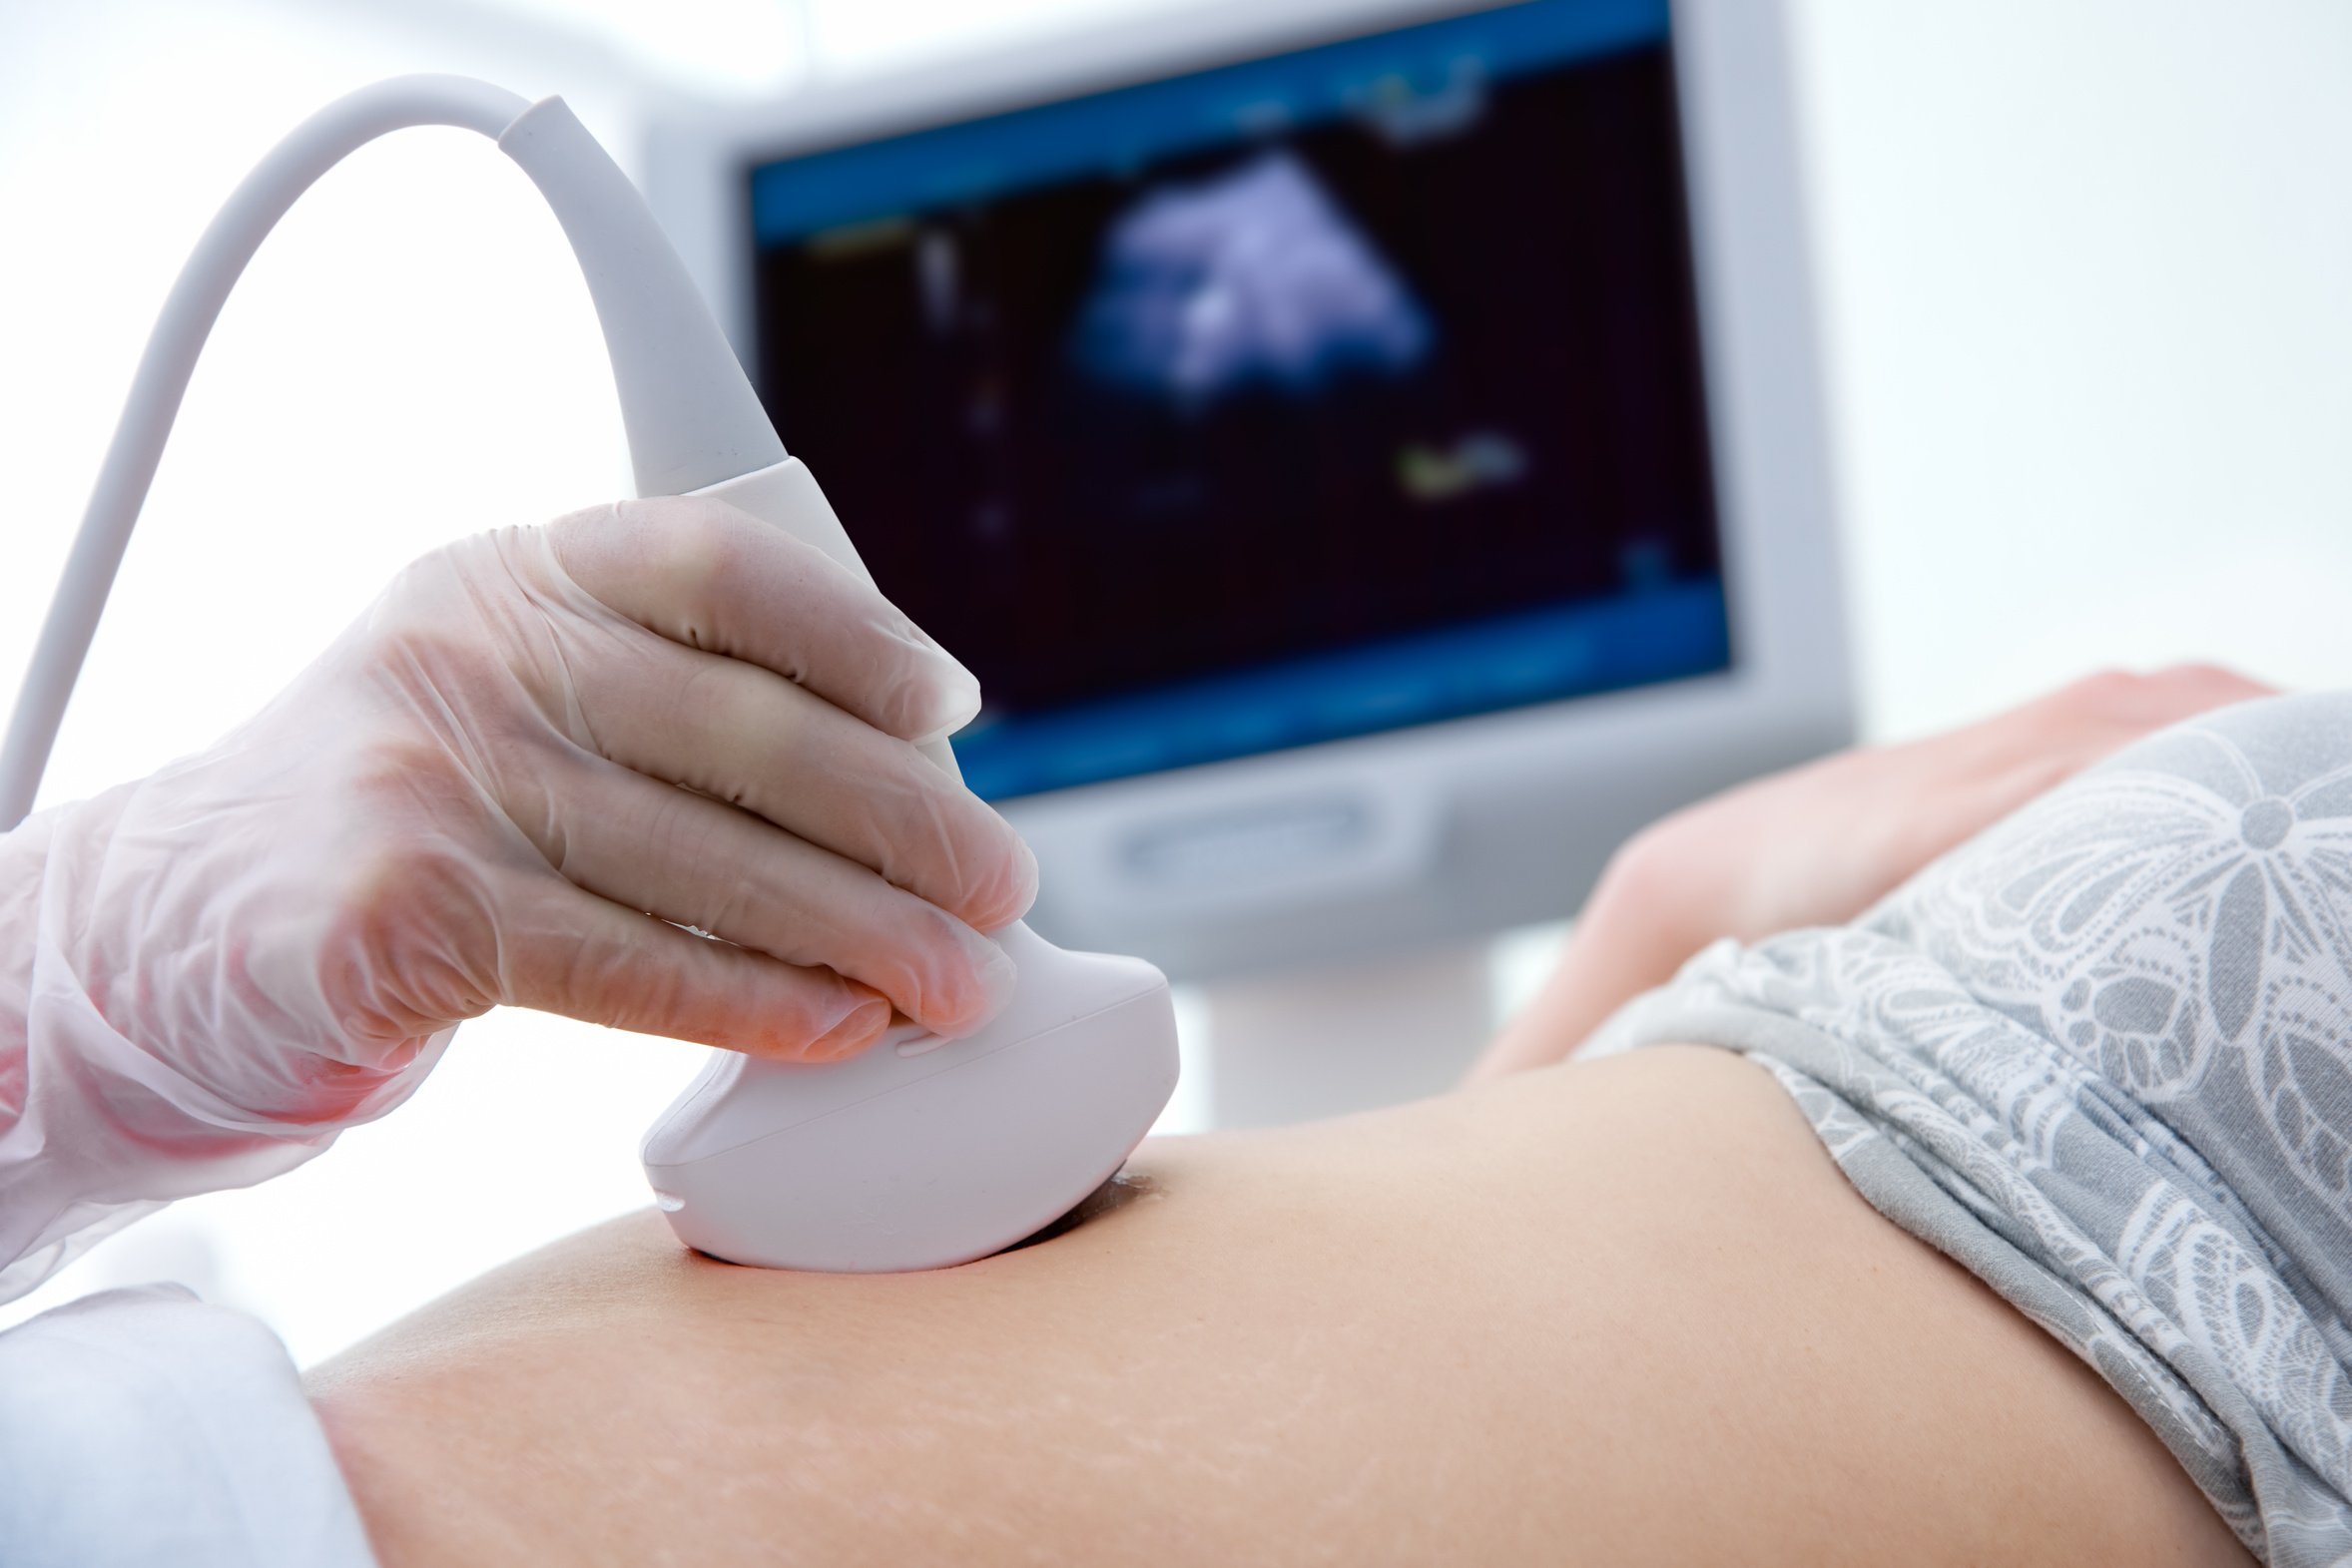   ULTRASOUND   Ultrasound technology is non-invasive by nature. With minimal preparation for the patient, ultrasound yields incredibly detailed information within minutes and is interpreted in time for your next physician appointment.   Learn more  